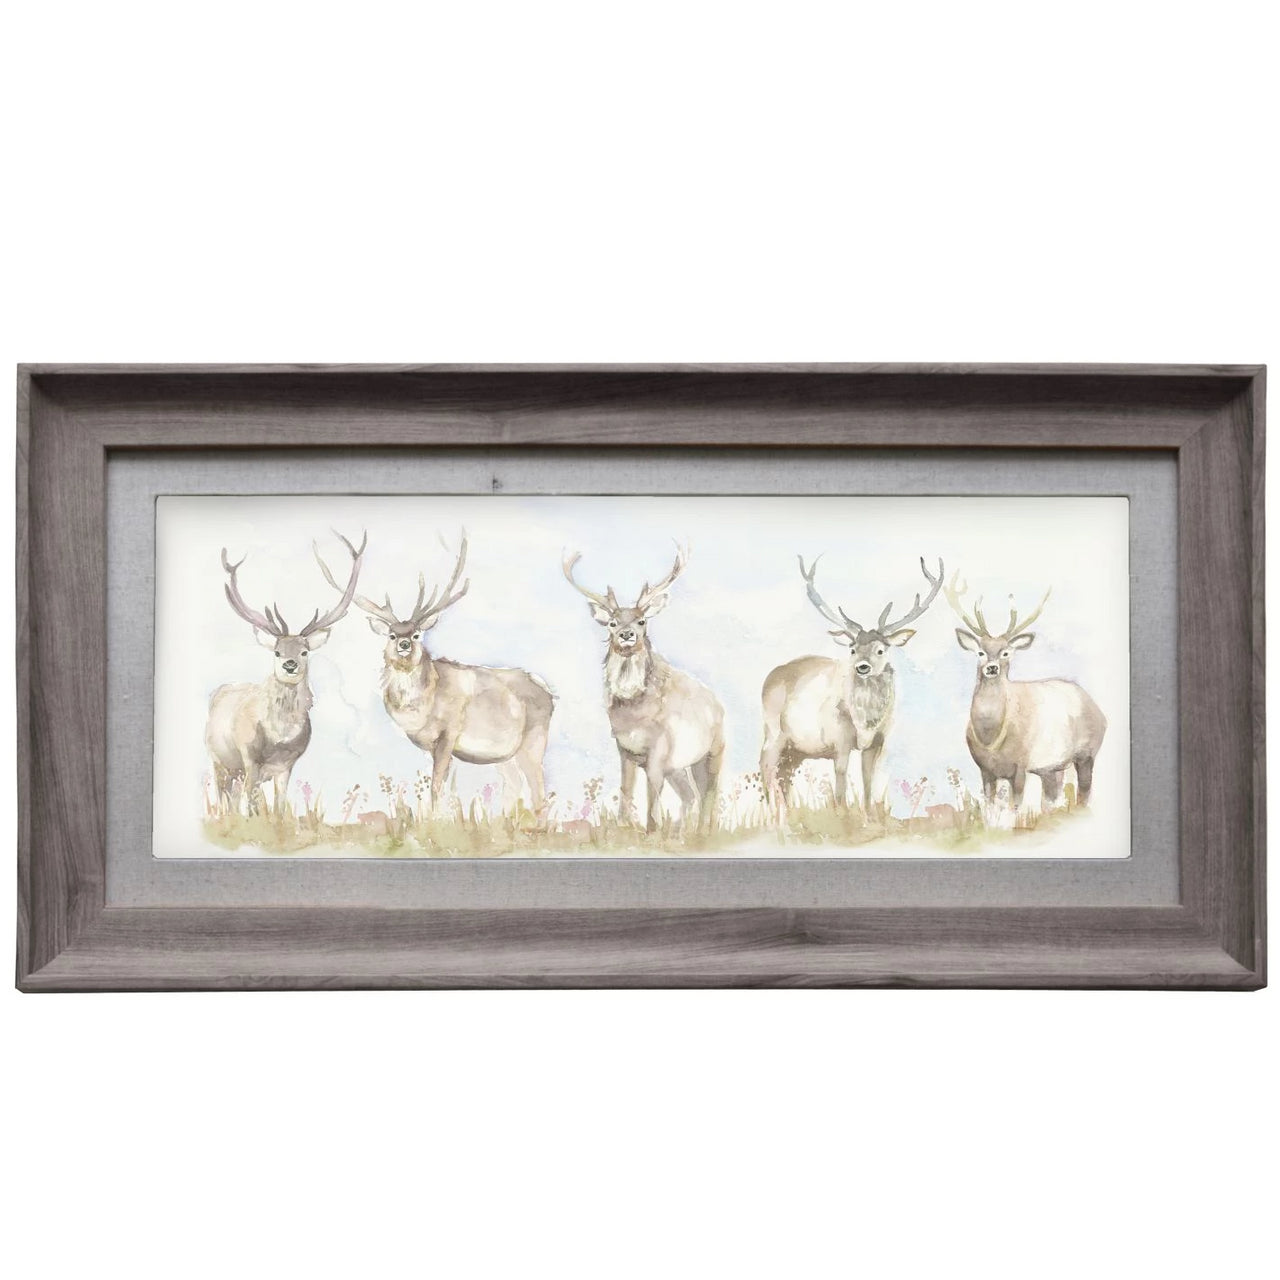 Moorland Stag Picture Voyage Maison Art Stone Frame